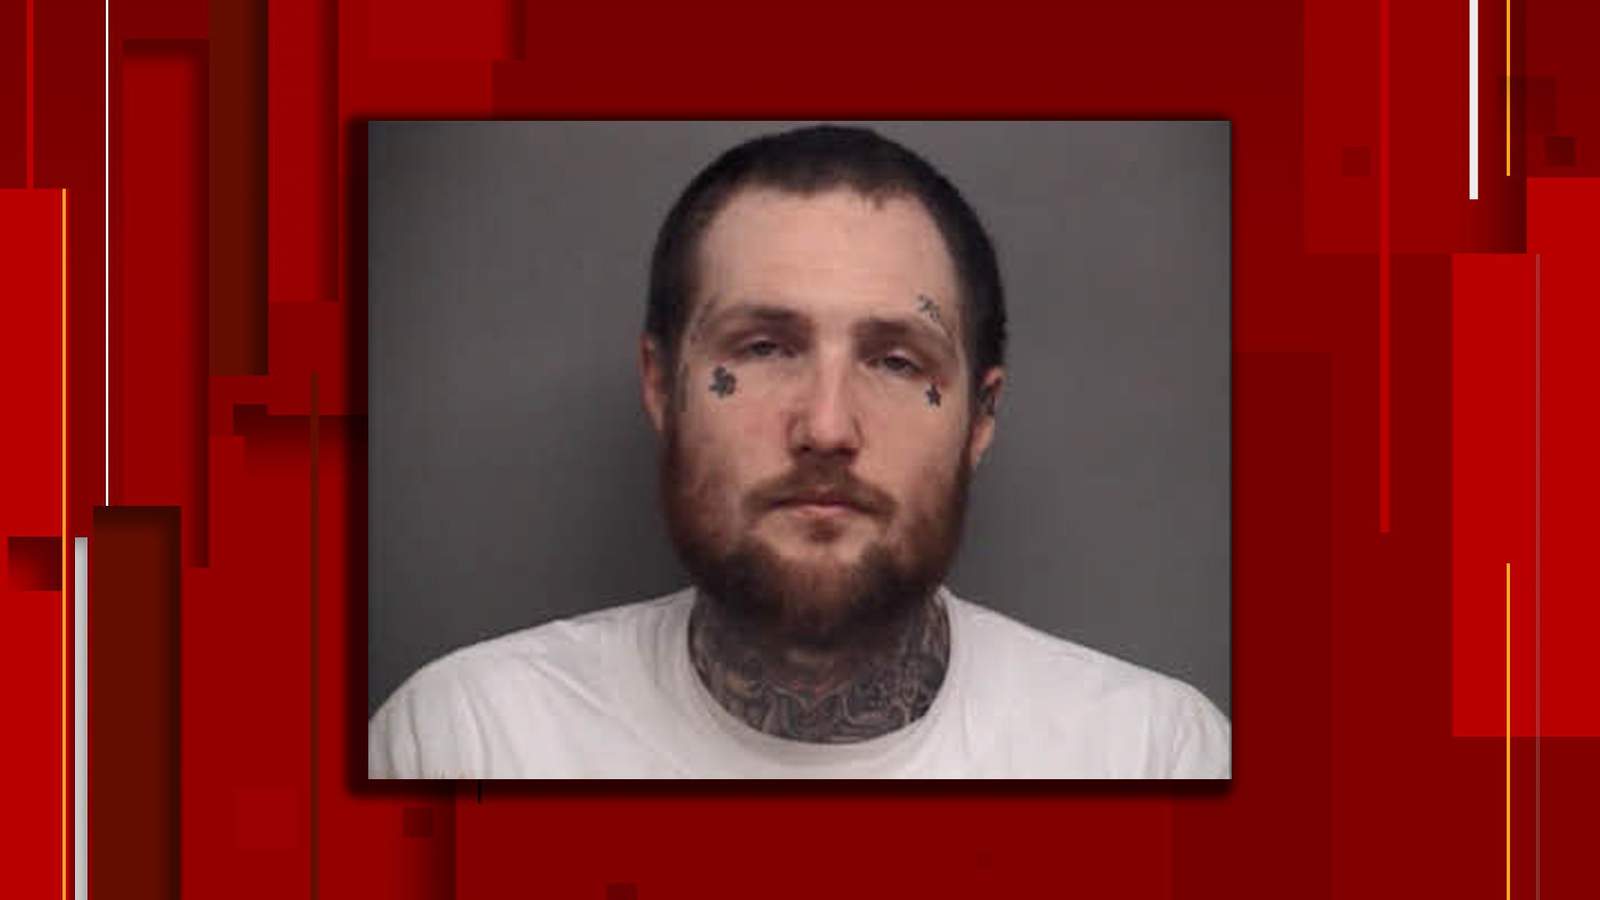 Man taken into custody in Henry County for drug charges following standoff